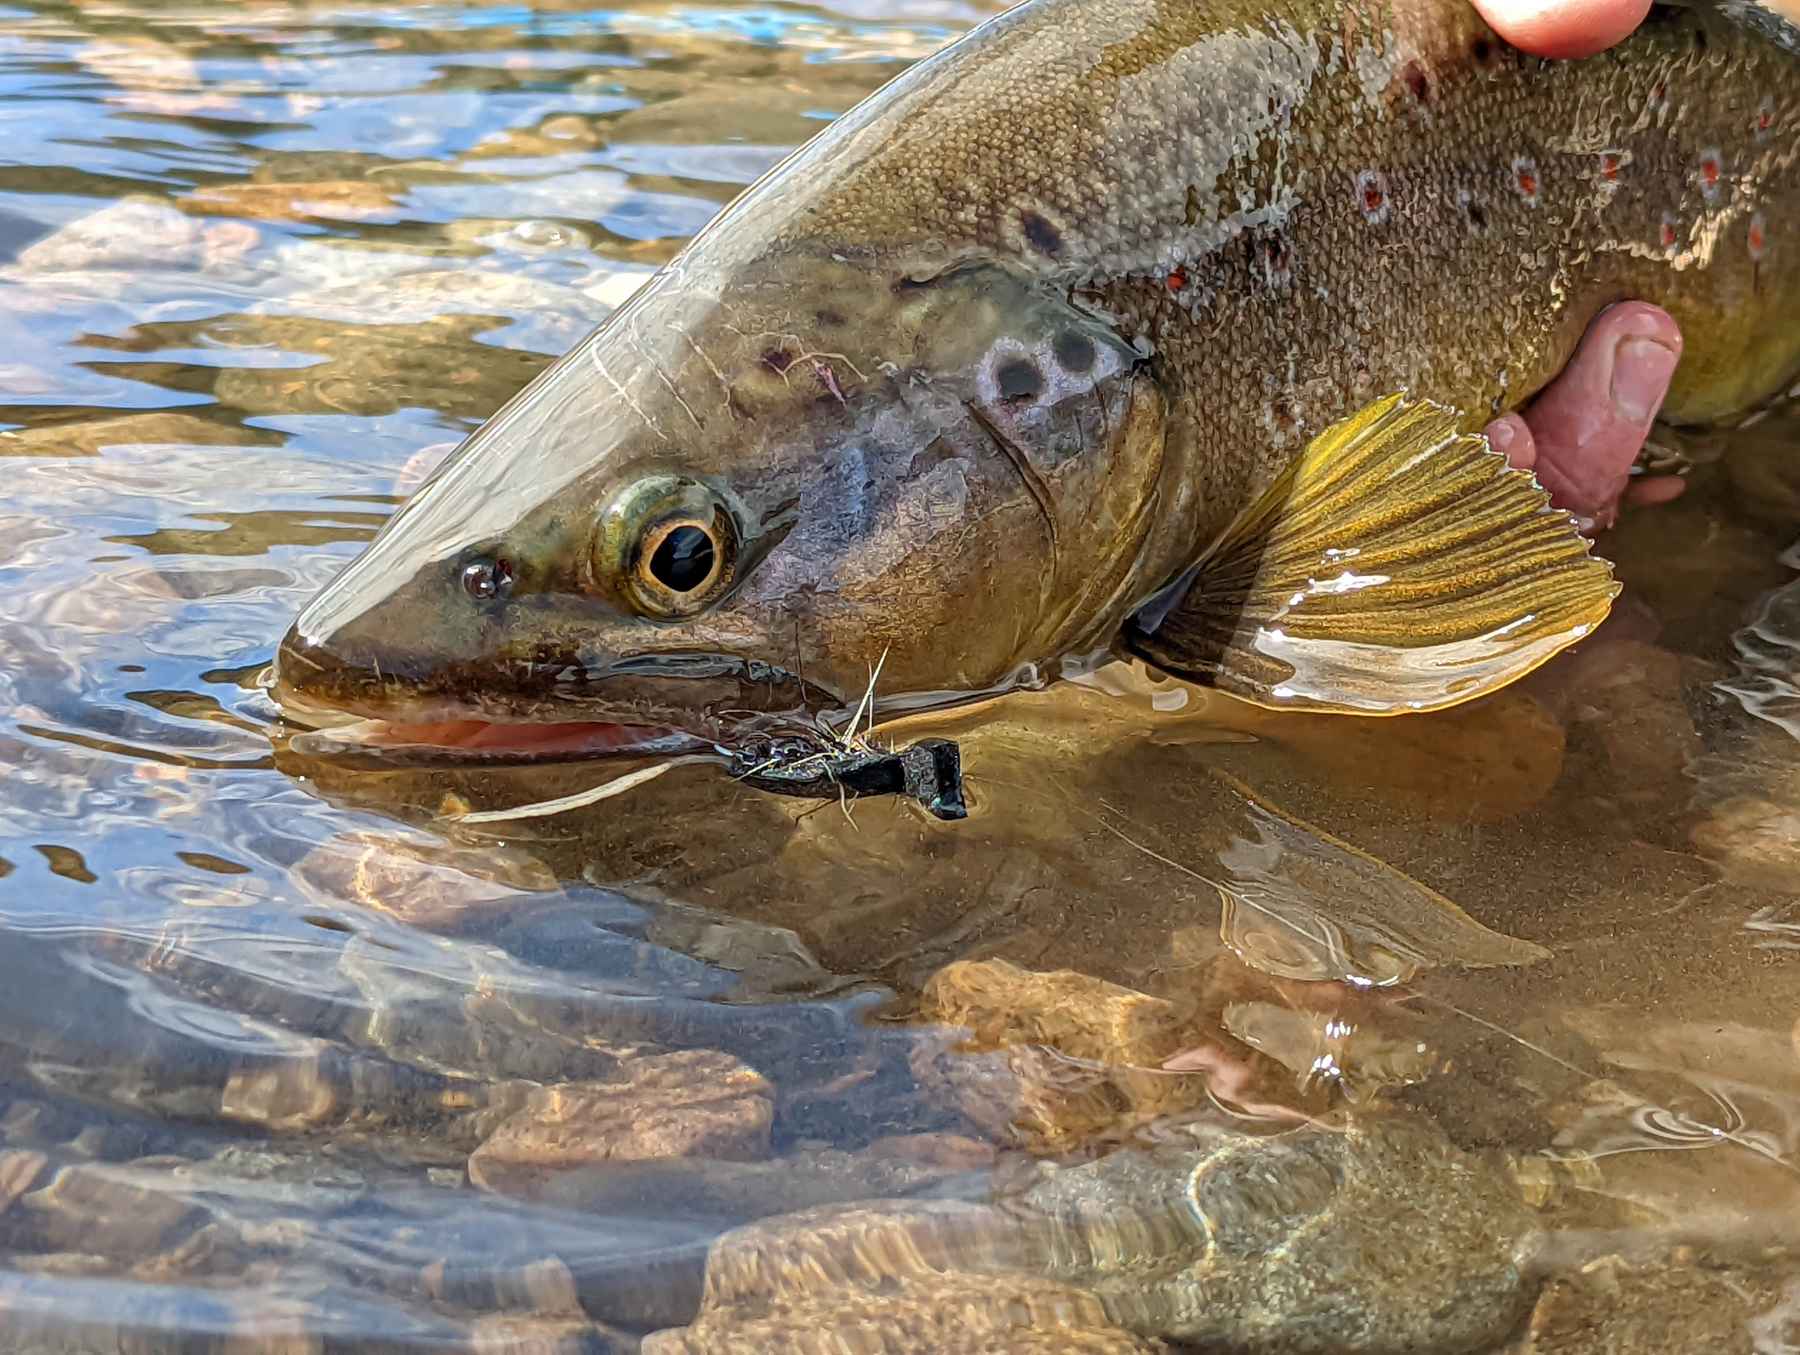 Fly fishing Q&A: Mousing at night  Hatch Magazine - Fly Fishing, etc.